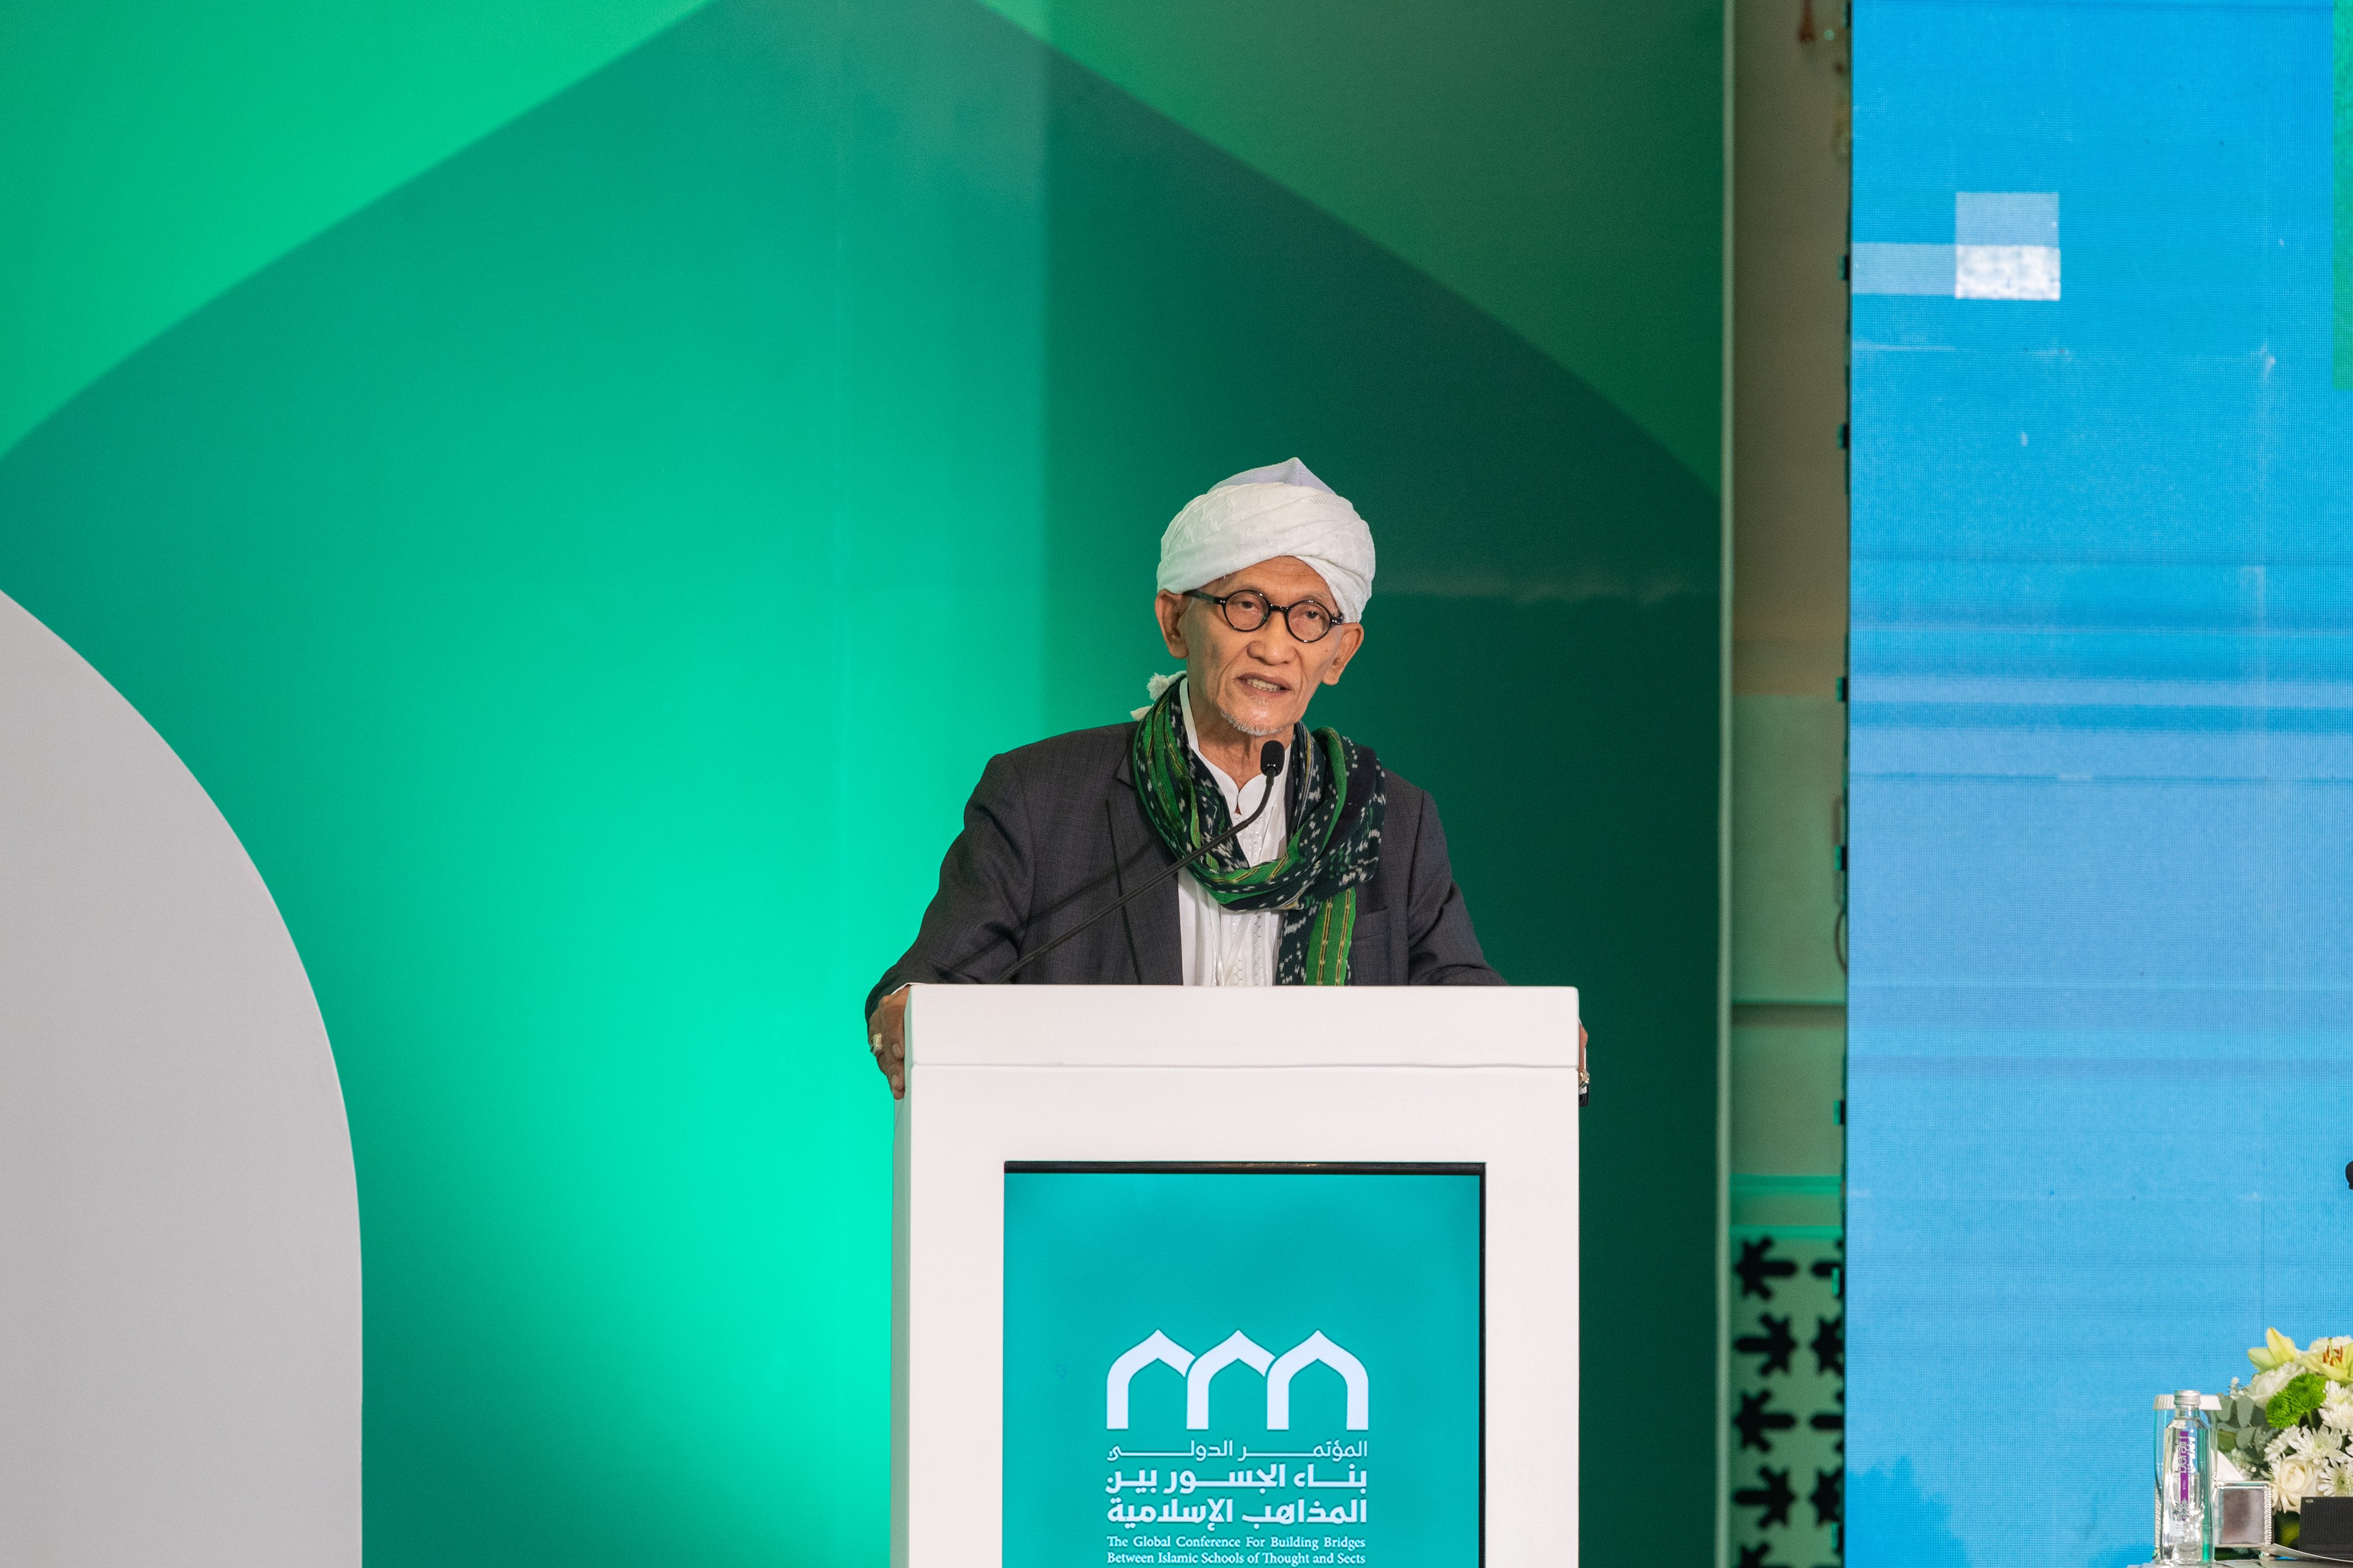 His Eminence Miftachul Akhyar, Chairman of the Nahdlatul Ulama Organization in Indonesia, at the opening ceremony of the Global Conference for Building Bridges between Islamic Schools of Thought and Sects: 